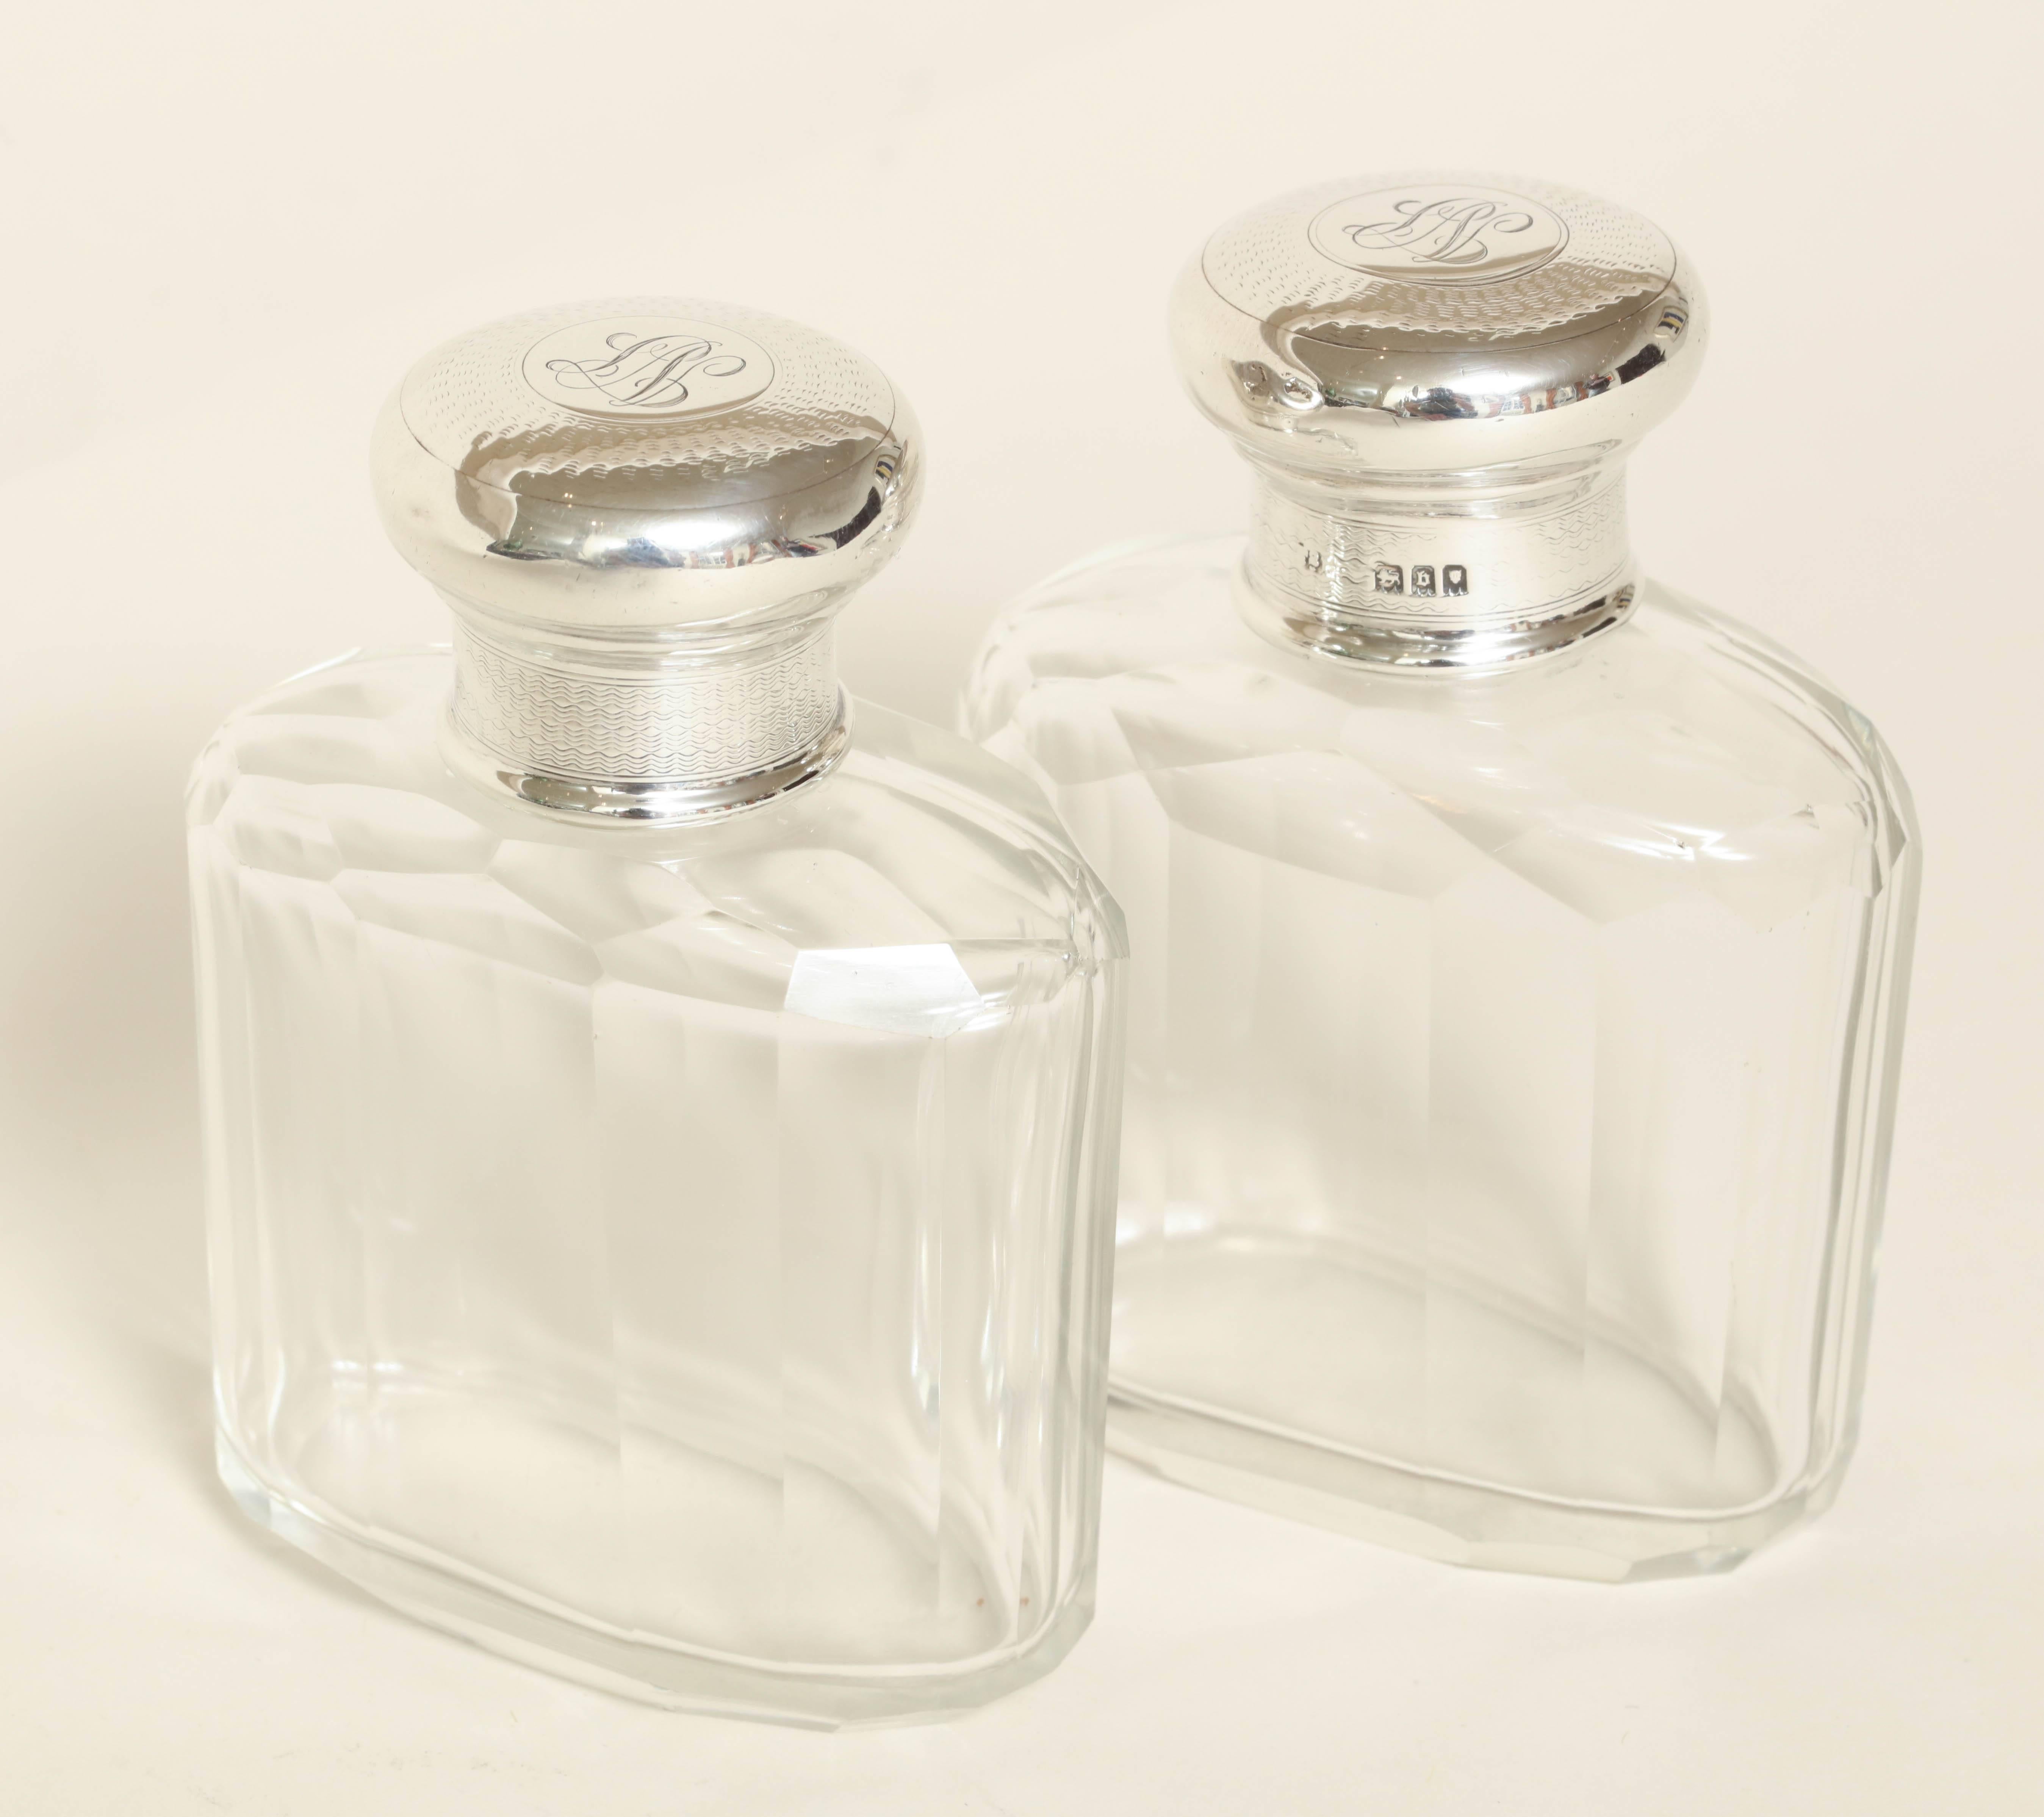 Measures: 3 ¾'' high

Faceted crystal body with silver screw tops.

Monogrammed L V.
Impressed for 925 silver/ London/ 1917/ S D.

(Price shown is reduced price, no further trade discount) 